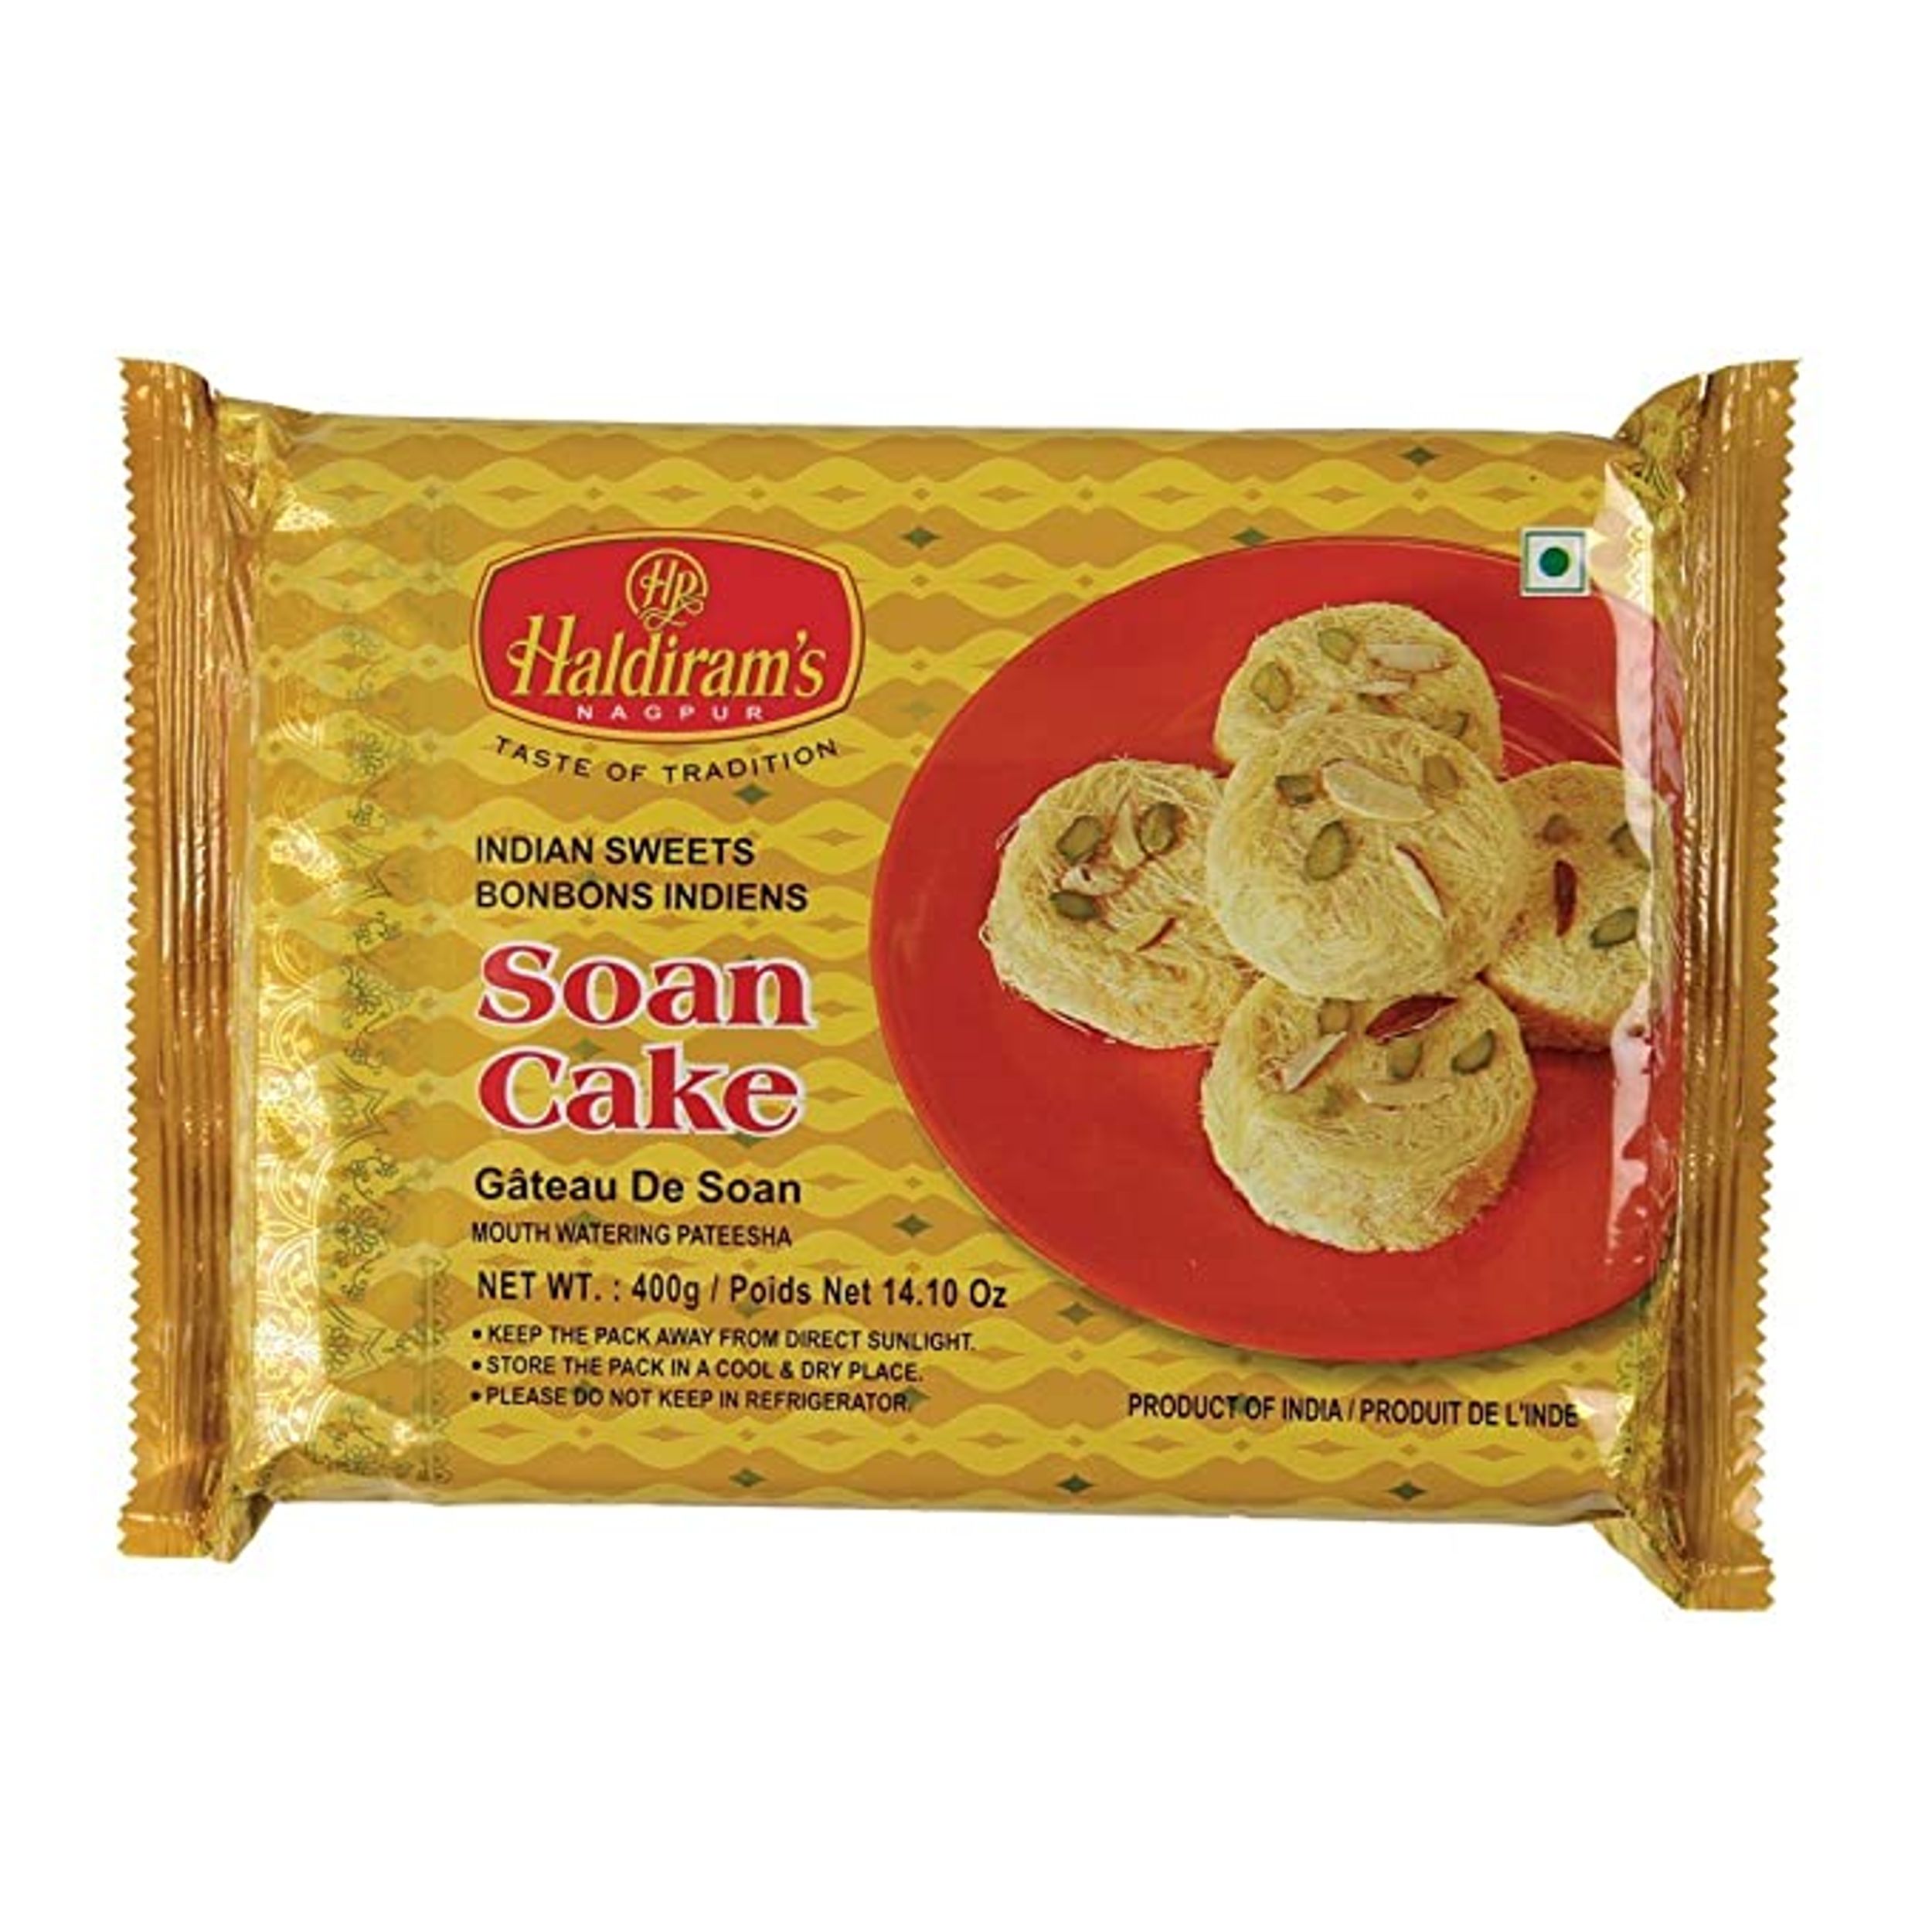 BTW Soan Cake Price - Buy Online at Best Price in India